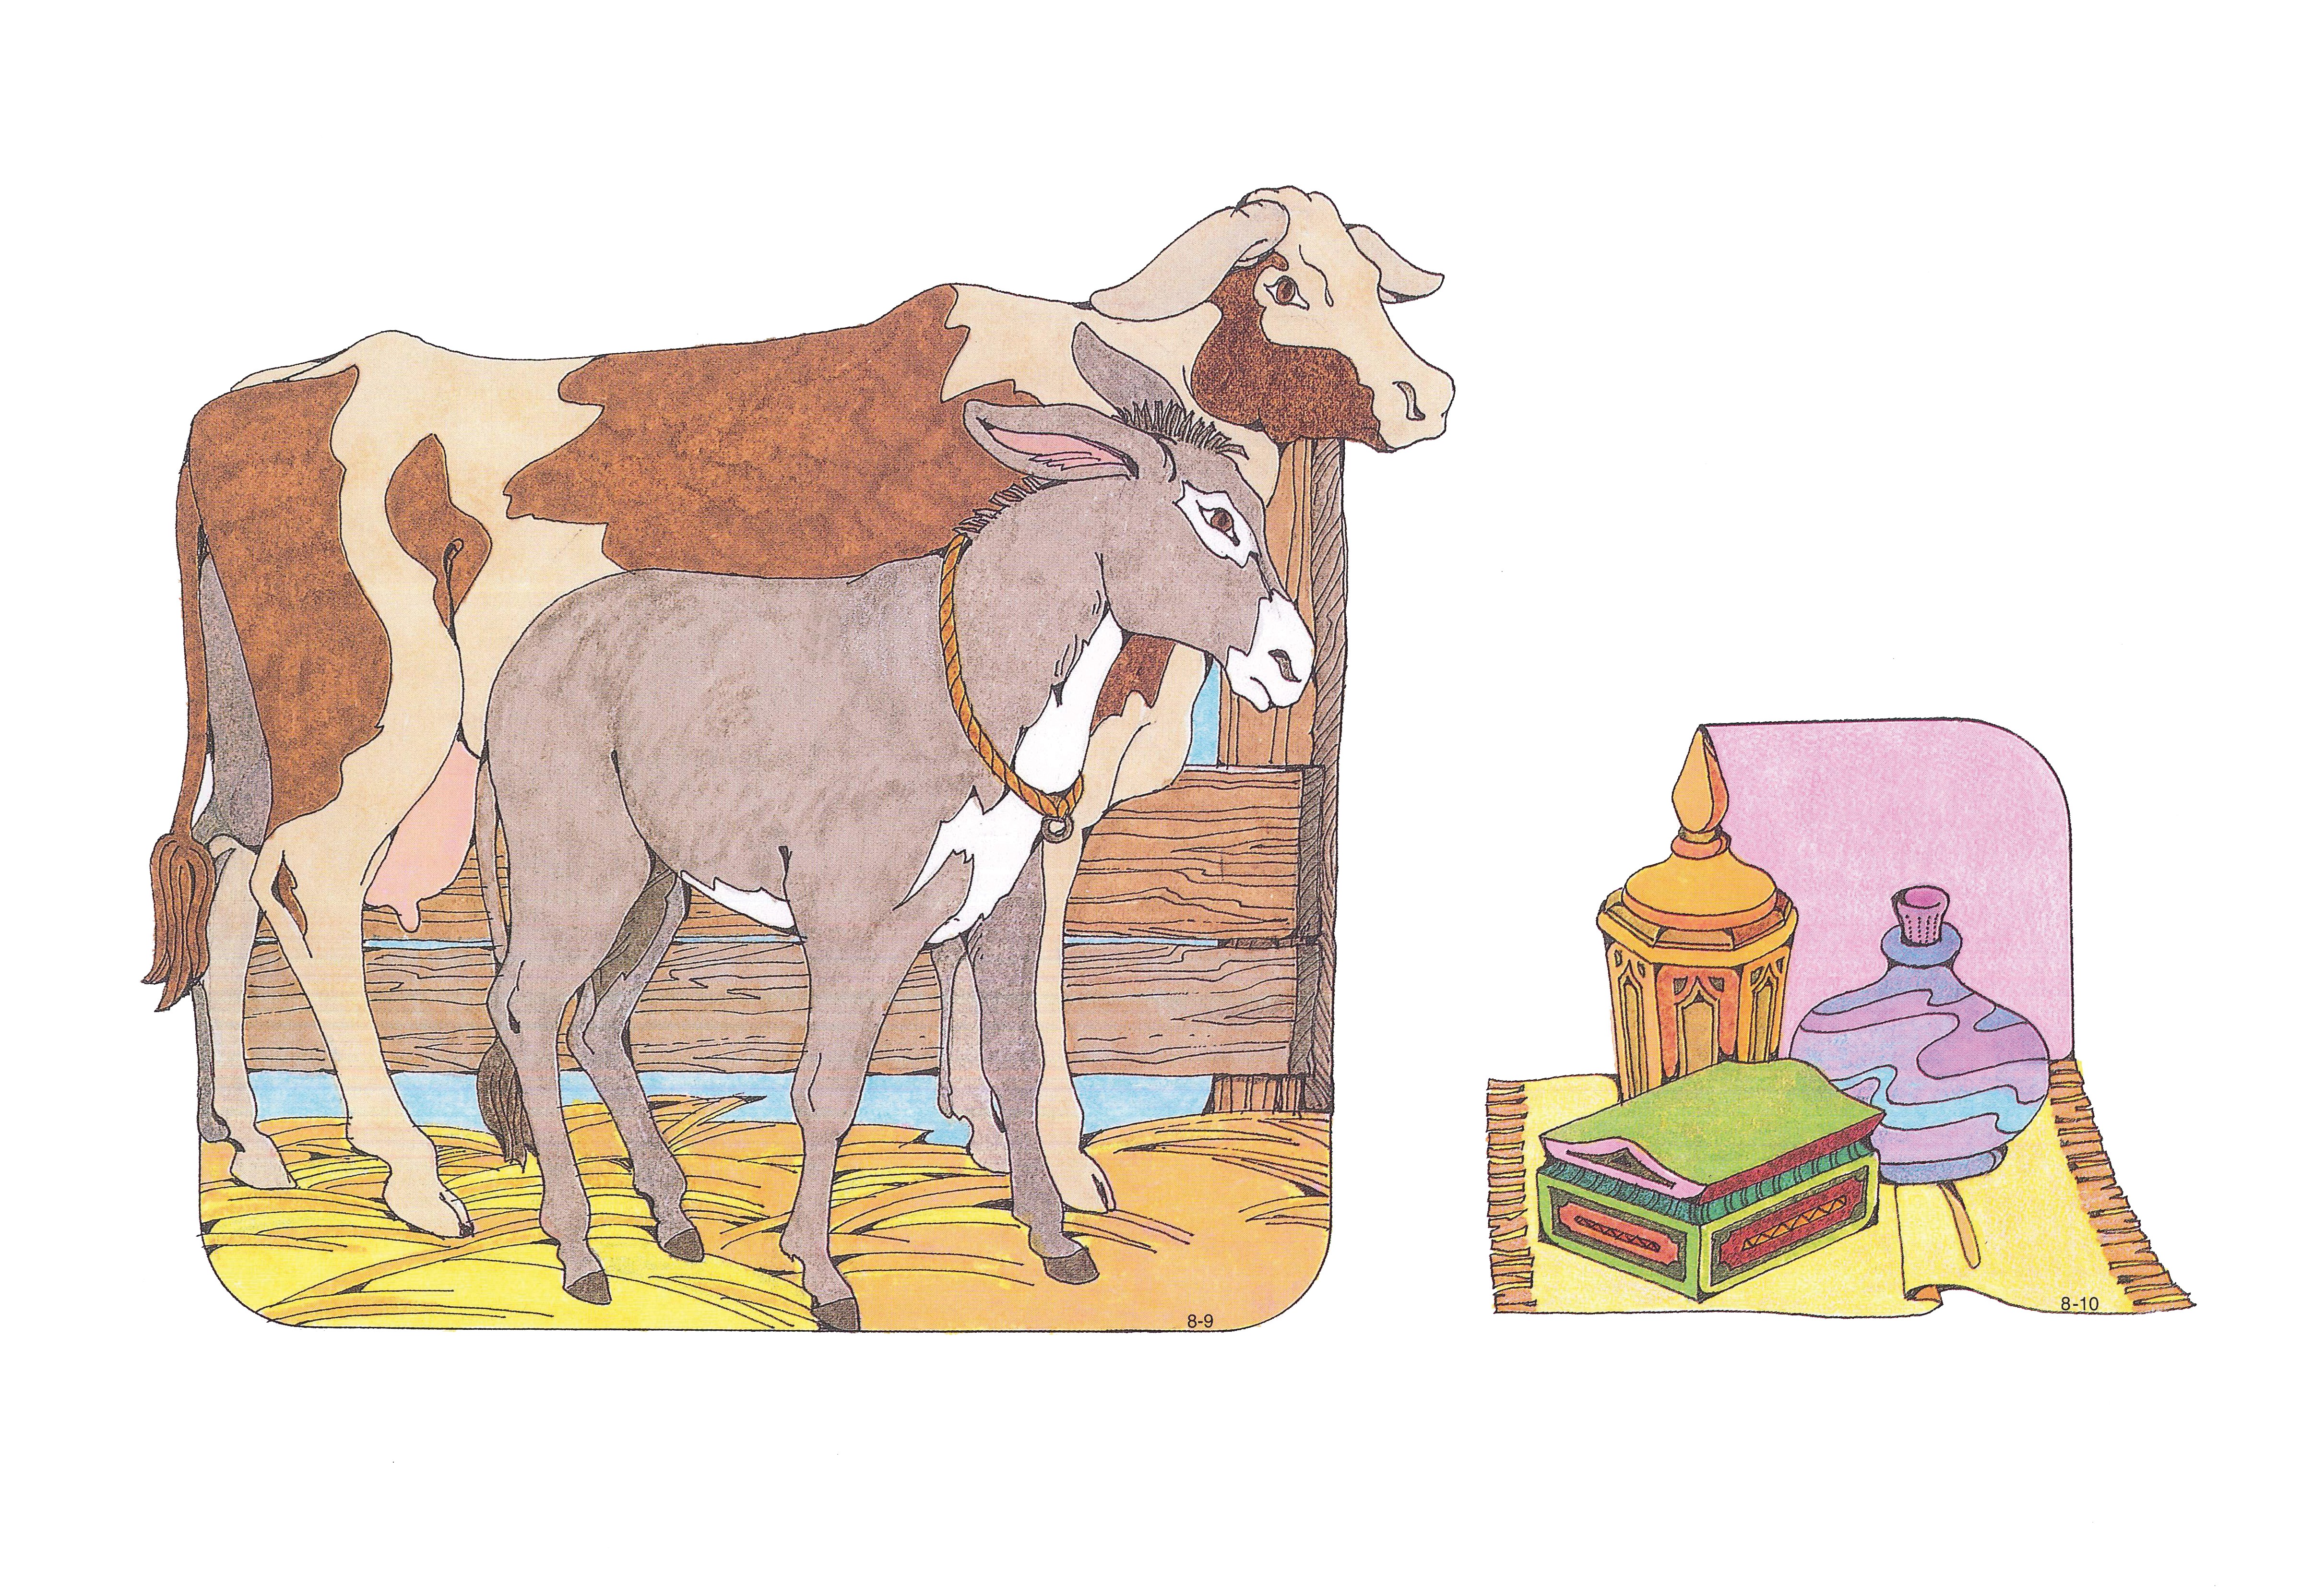 Two Primary cutouts of a cow standing with a donkey by a fence, and the gift from the Magi (the Wise Men).